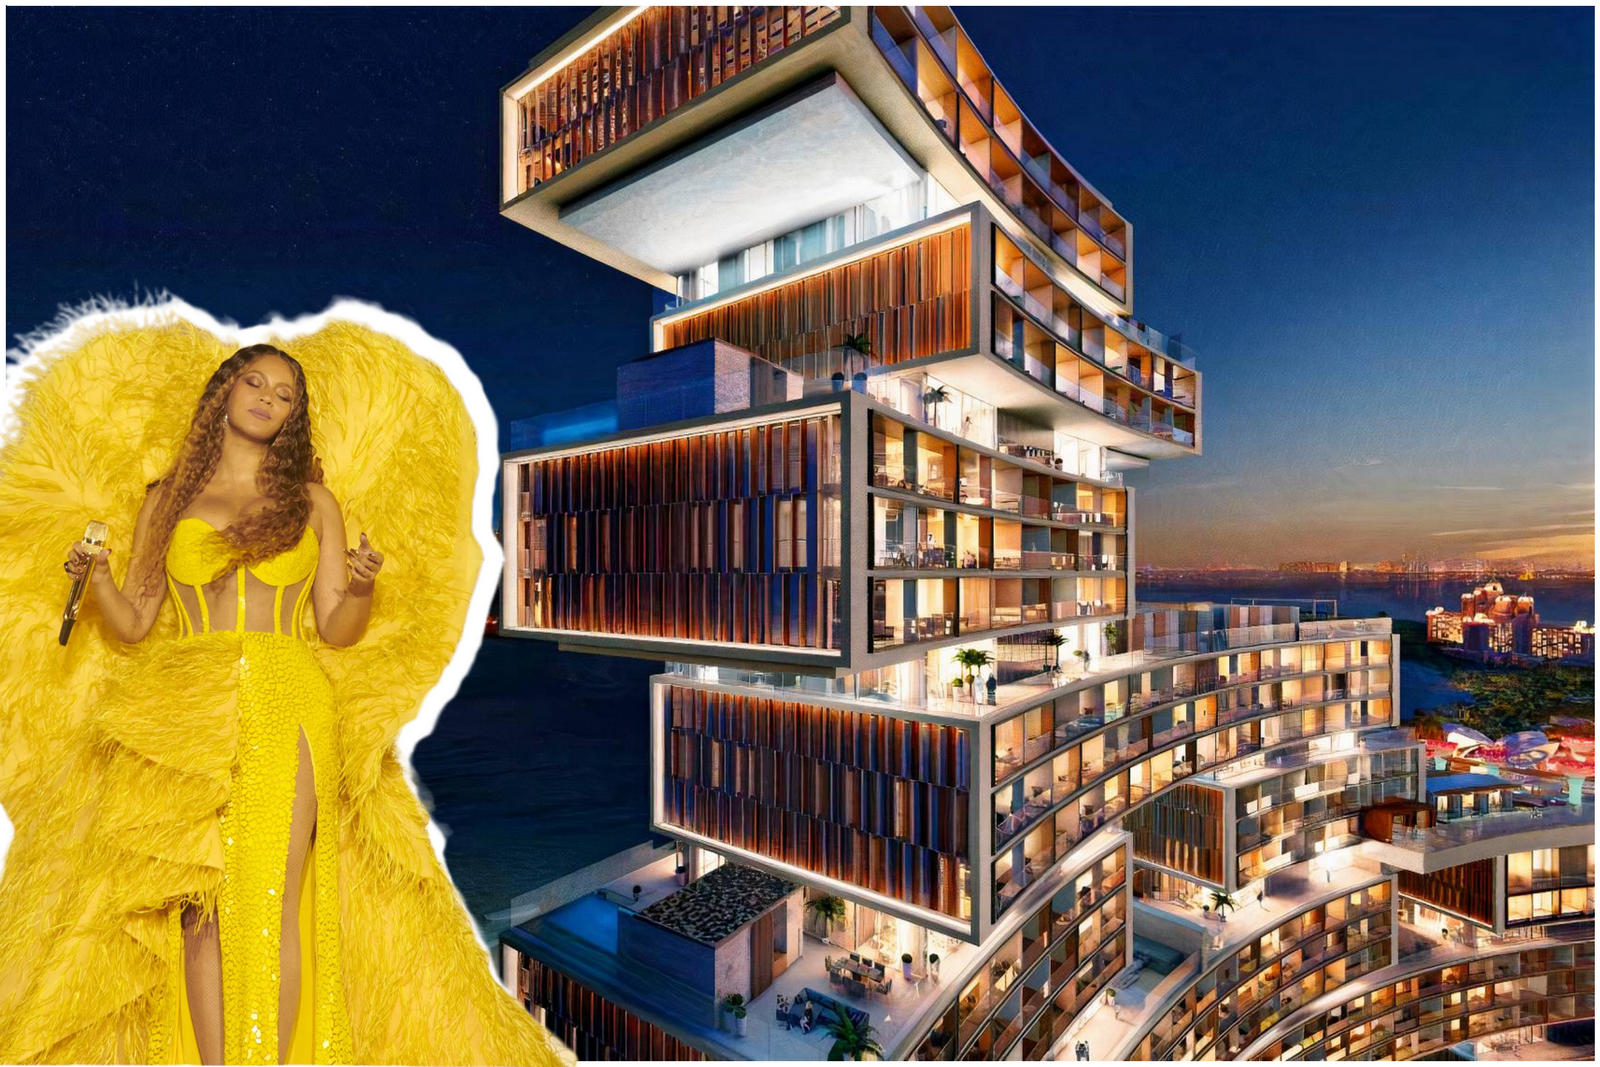 This swanky Dubai hotel paid Beyoncé 328,780 per minute to perform at